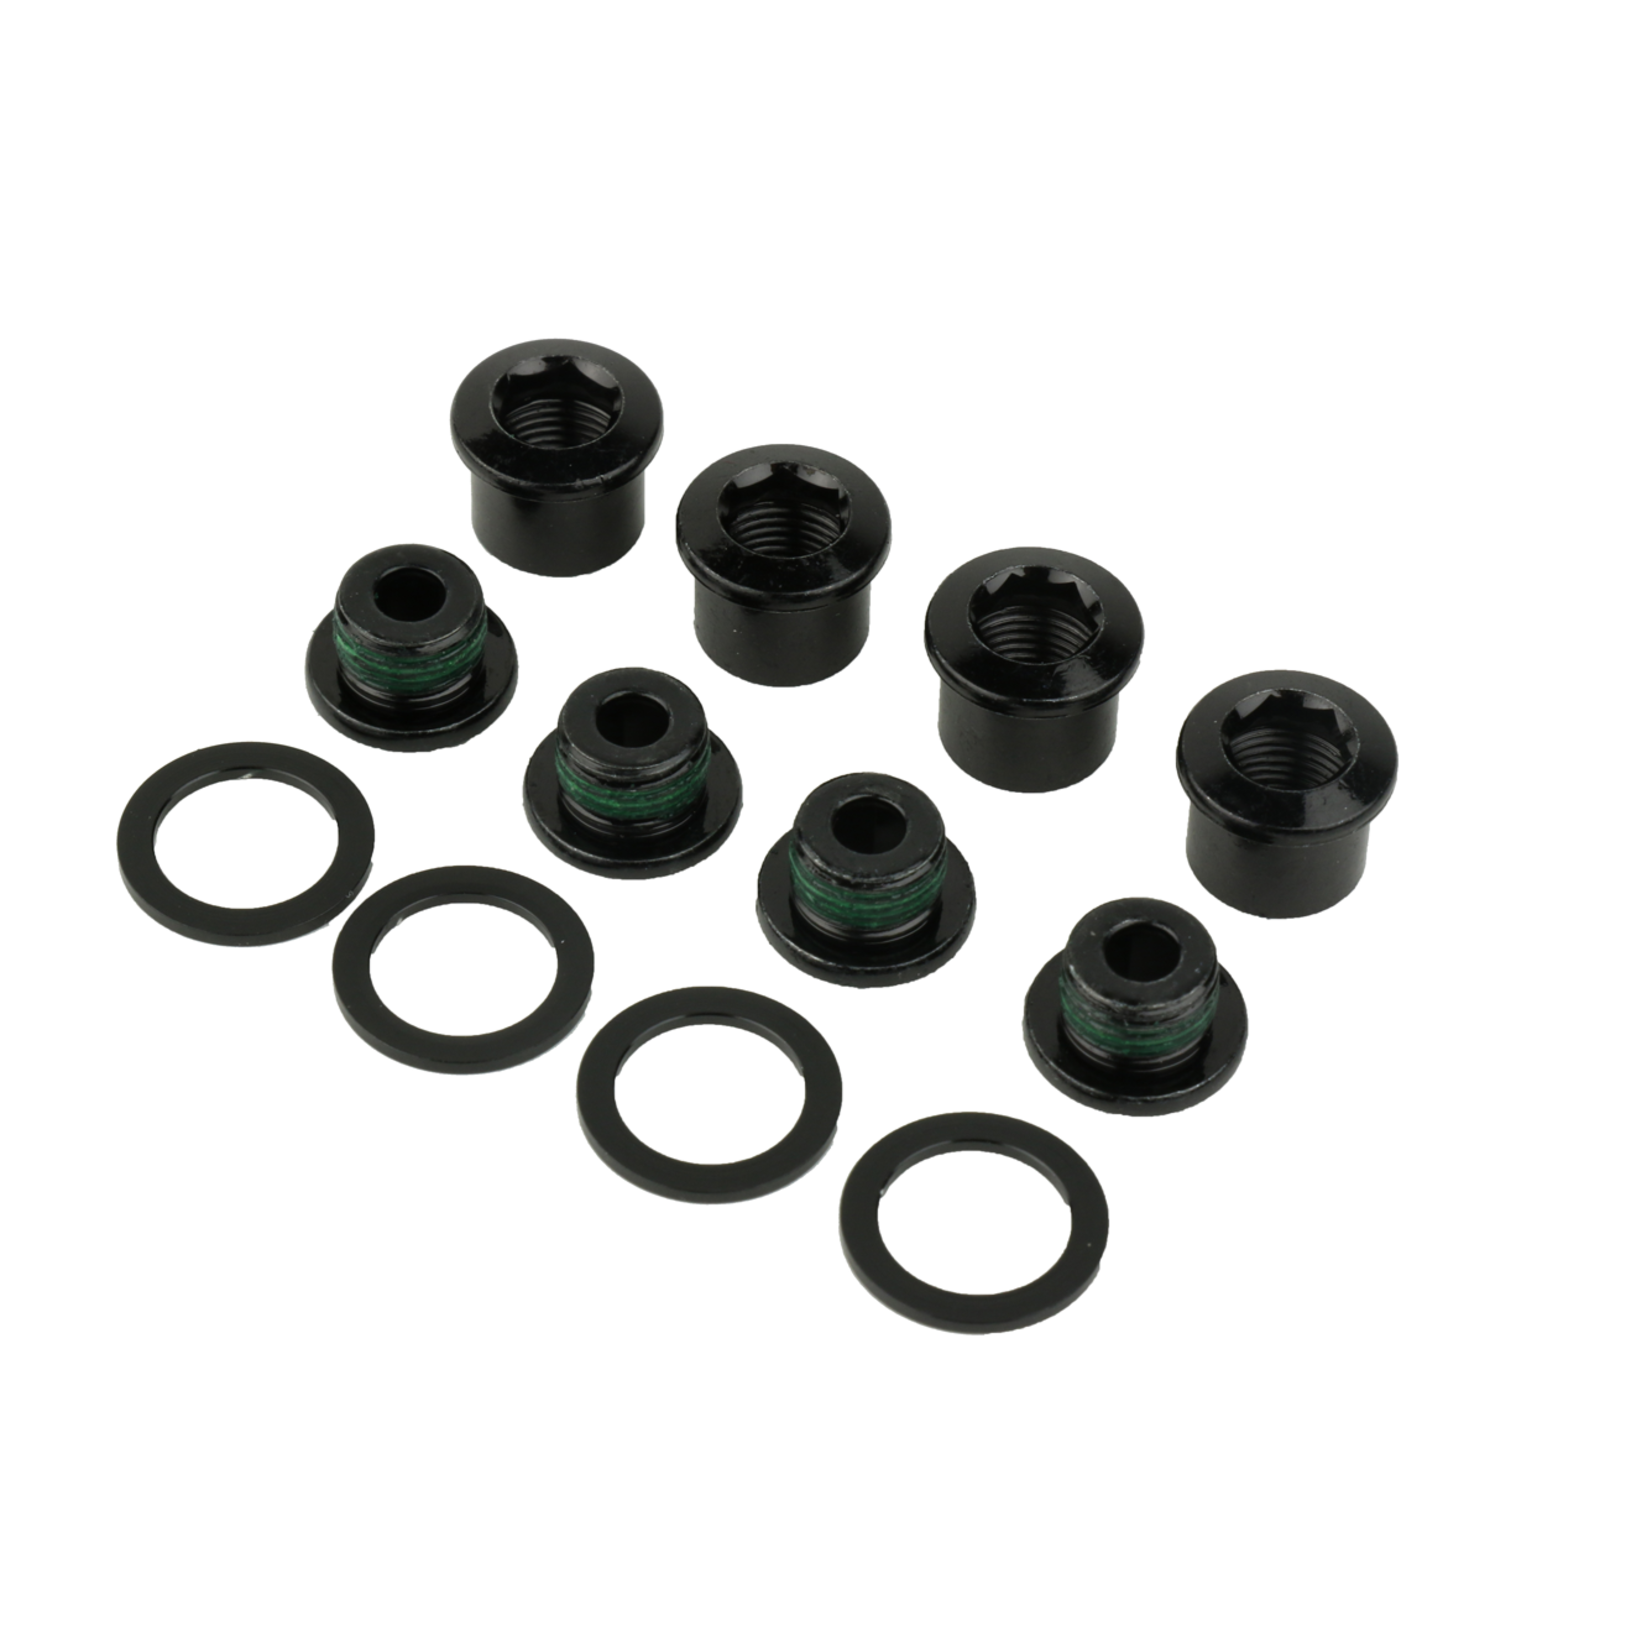 SRAM, X01/DH Chainring Bolt Kit Black Aluminum for X01 and X01DH